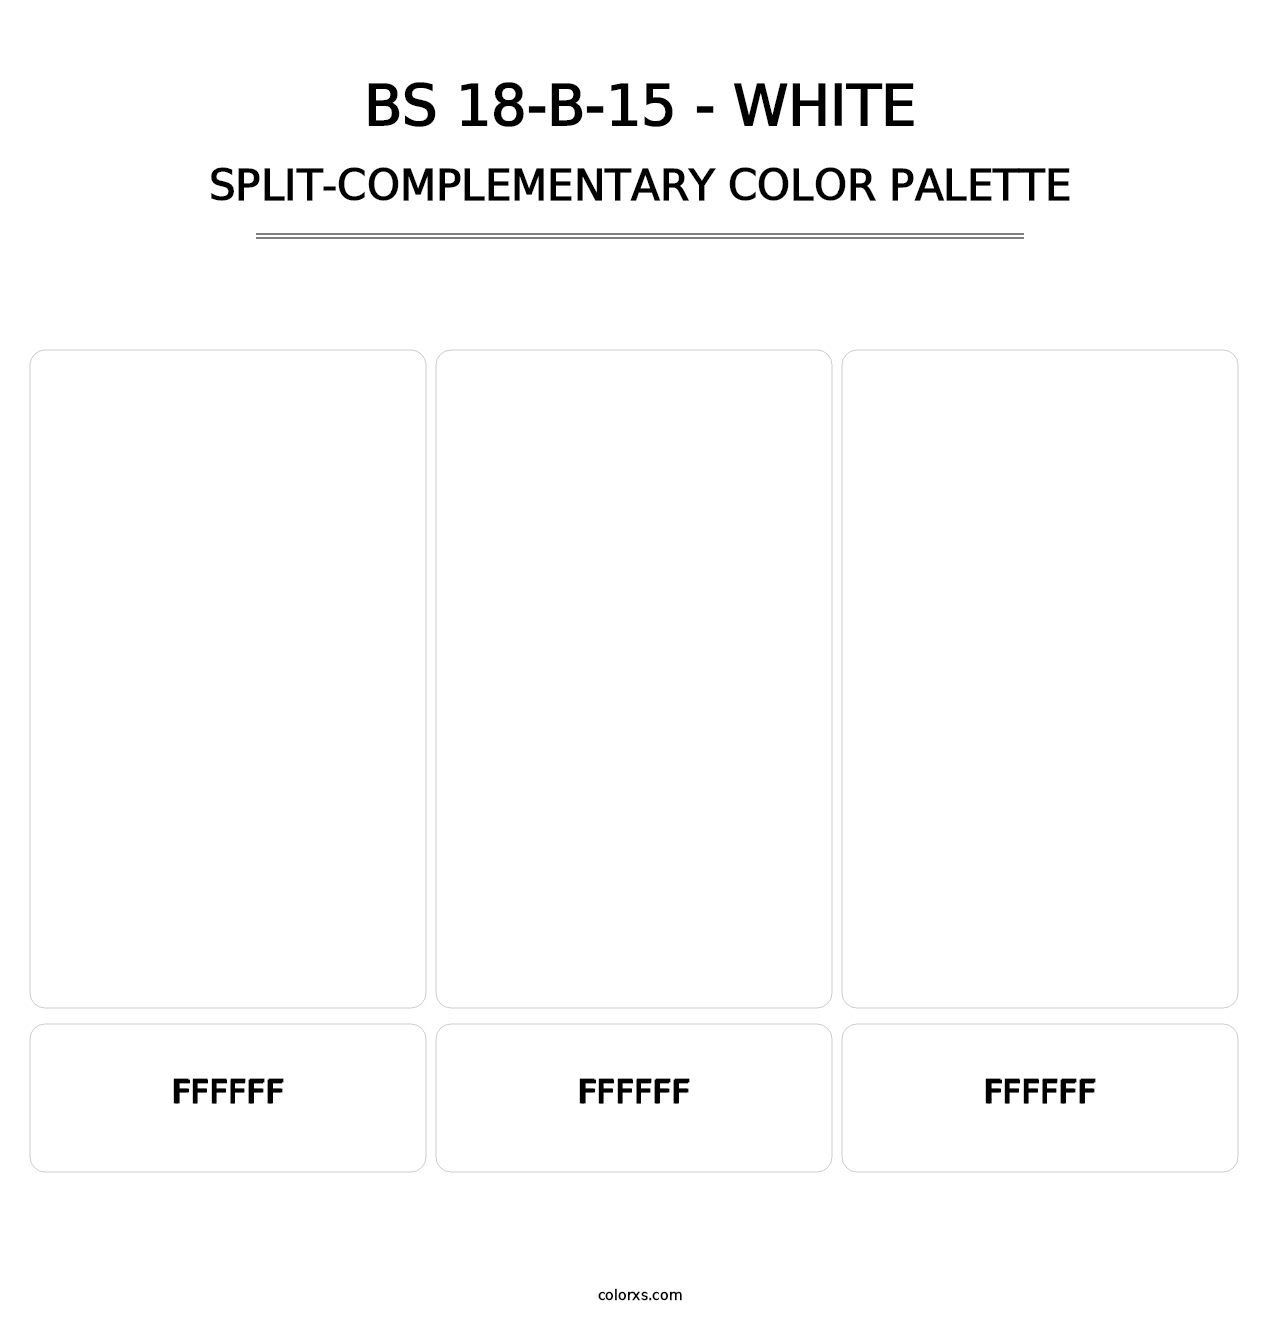 BS 18-B-15 - White - Split-Complementary Color Palette